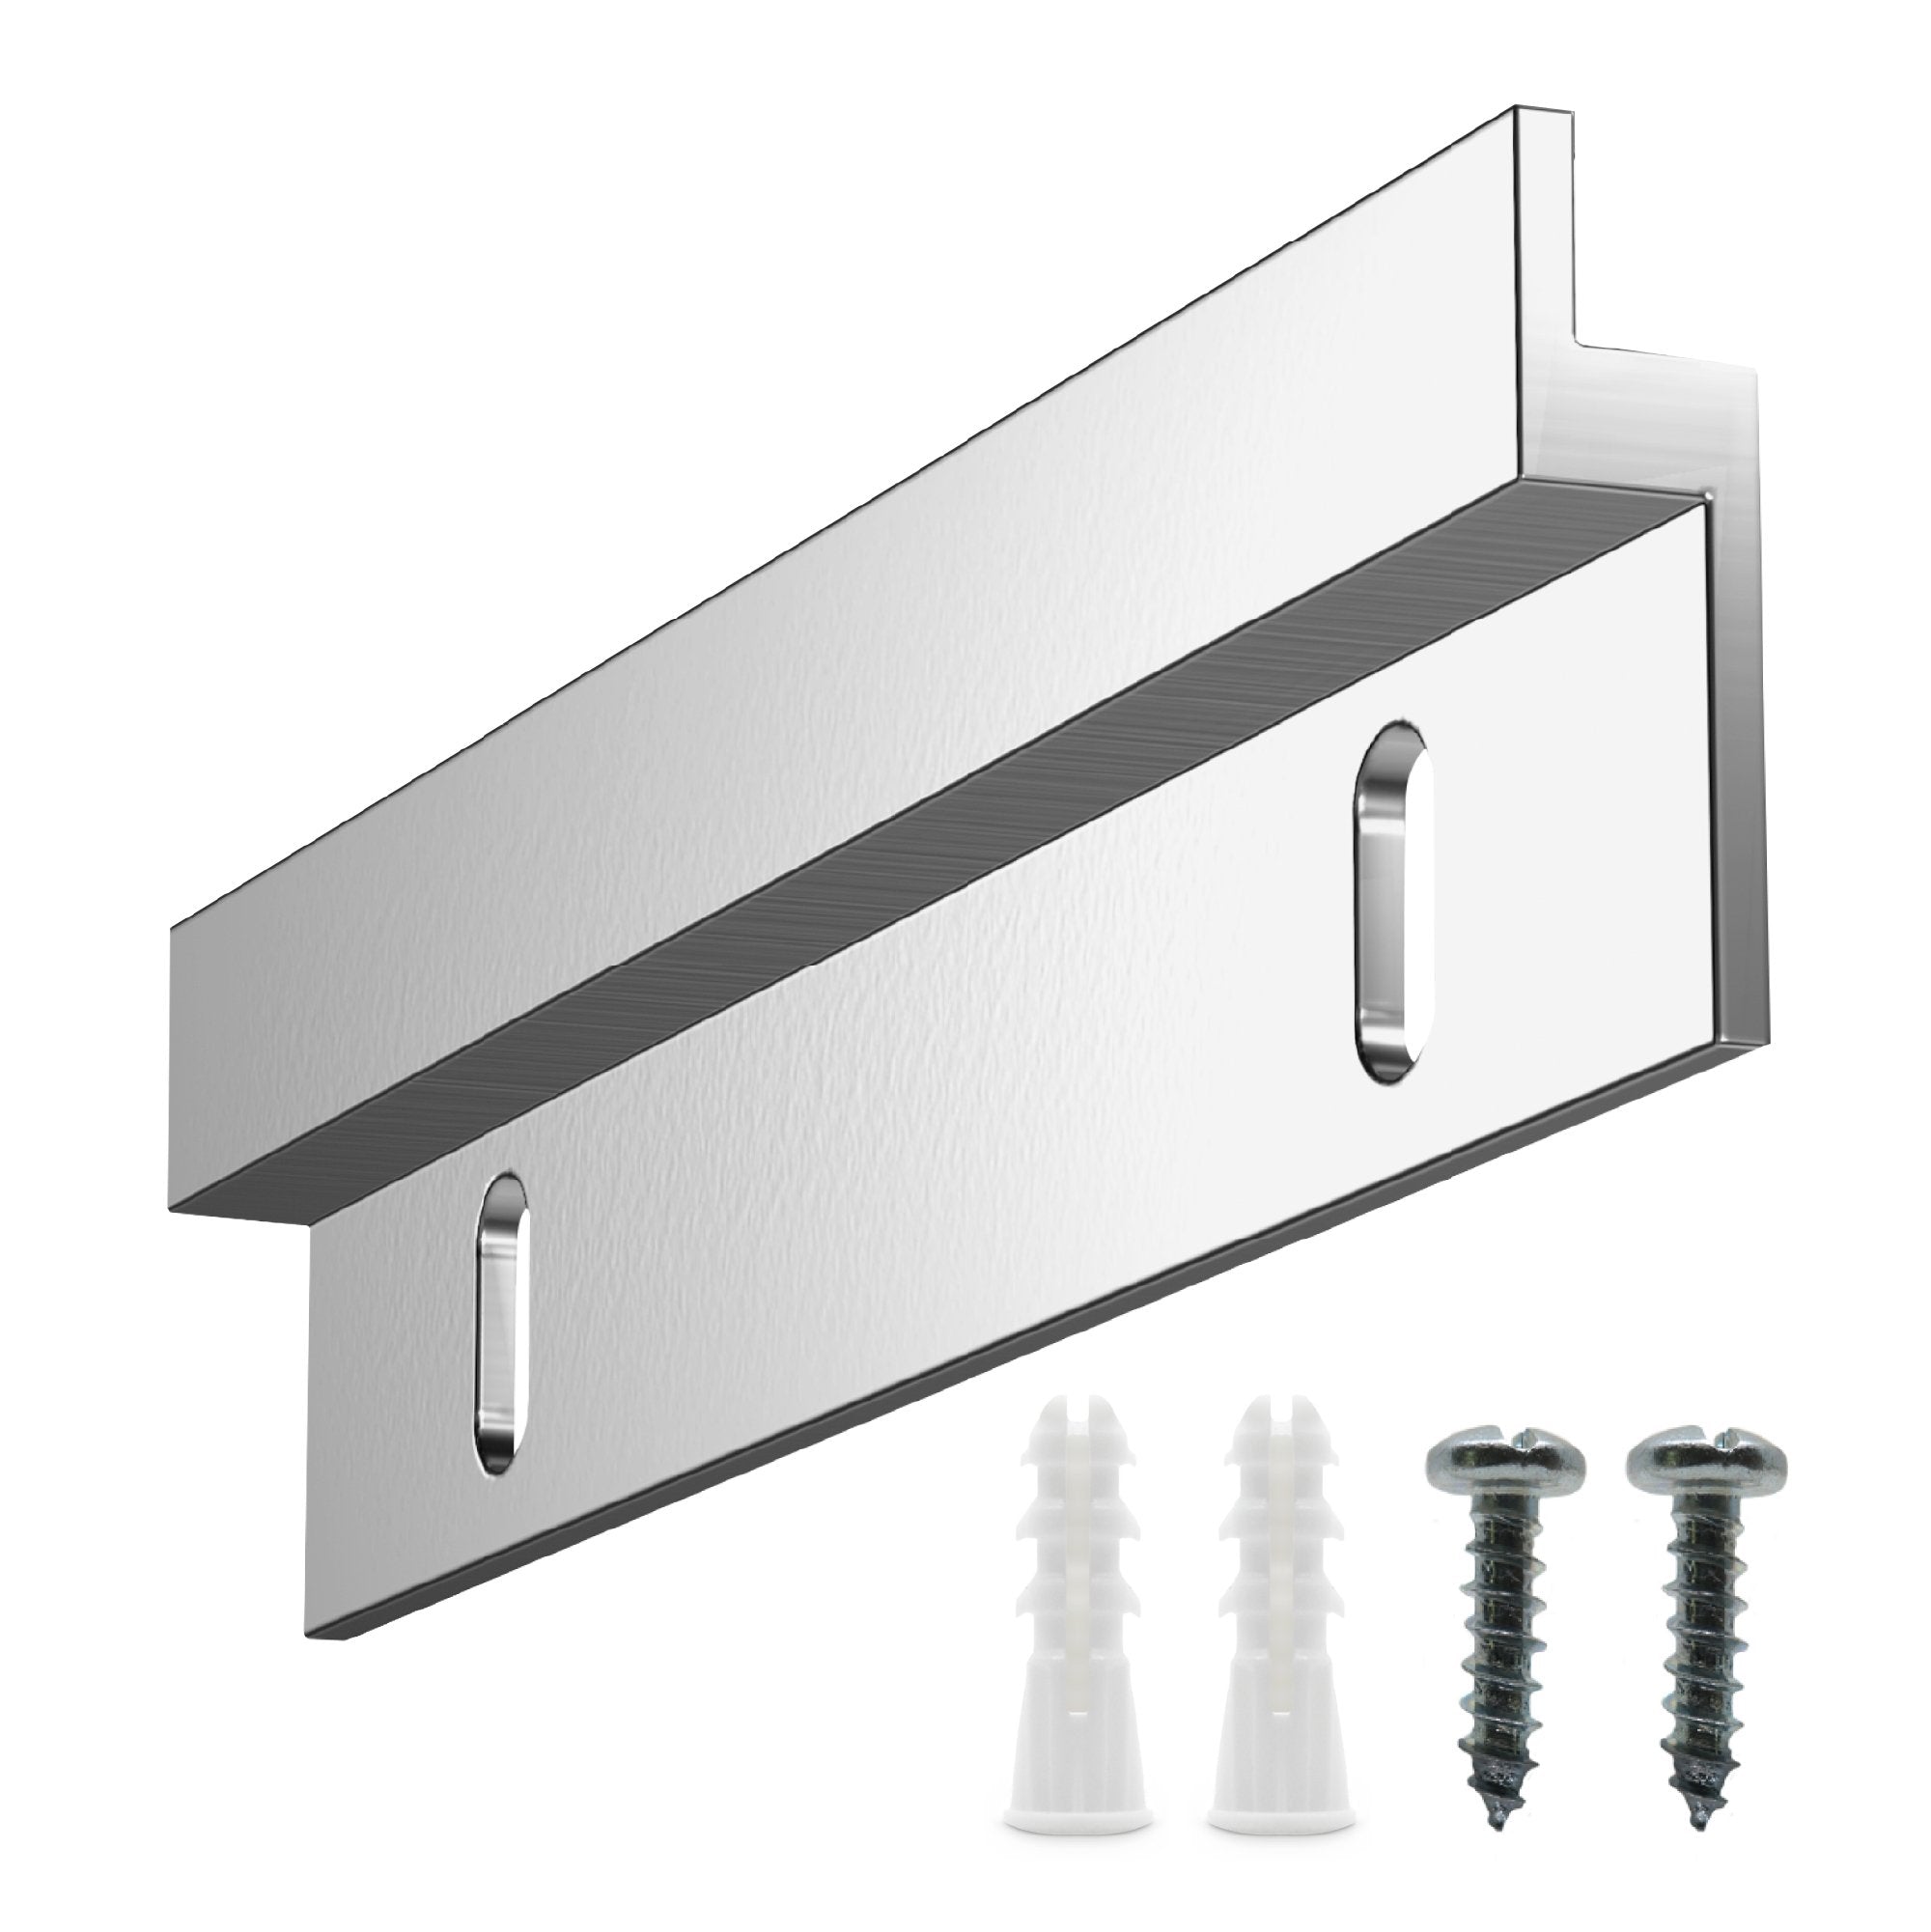 Light Cleat 6 inch Metal Frame Kit - S - HWR - 170 - Picture Hang Solutions